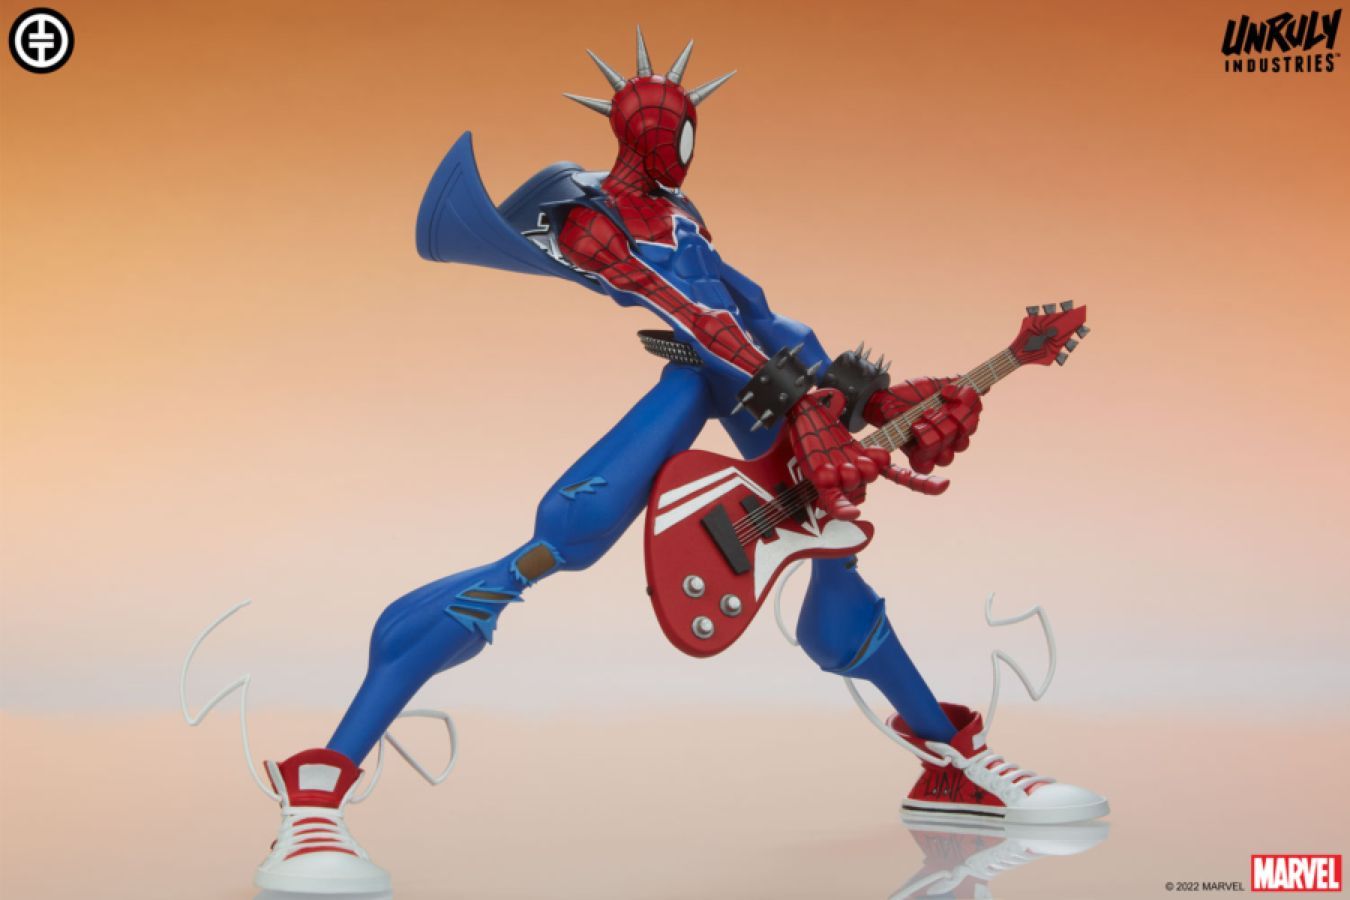 SPIDER-PUNK Designer Collectible Statue by Unruly Industries